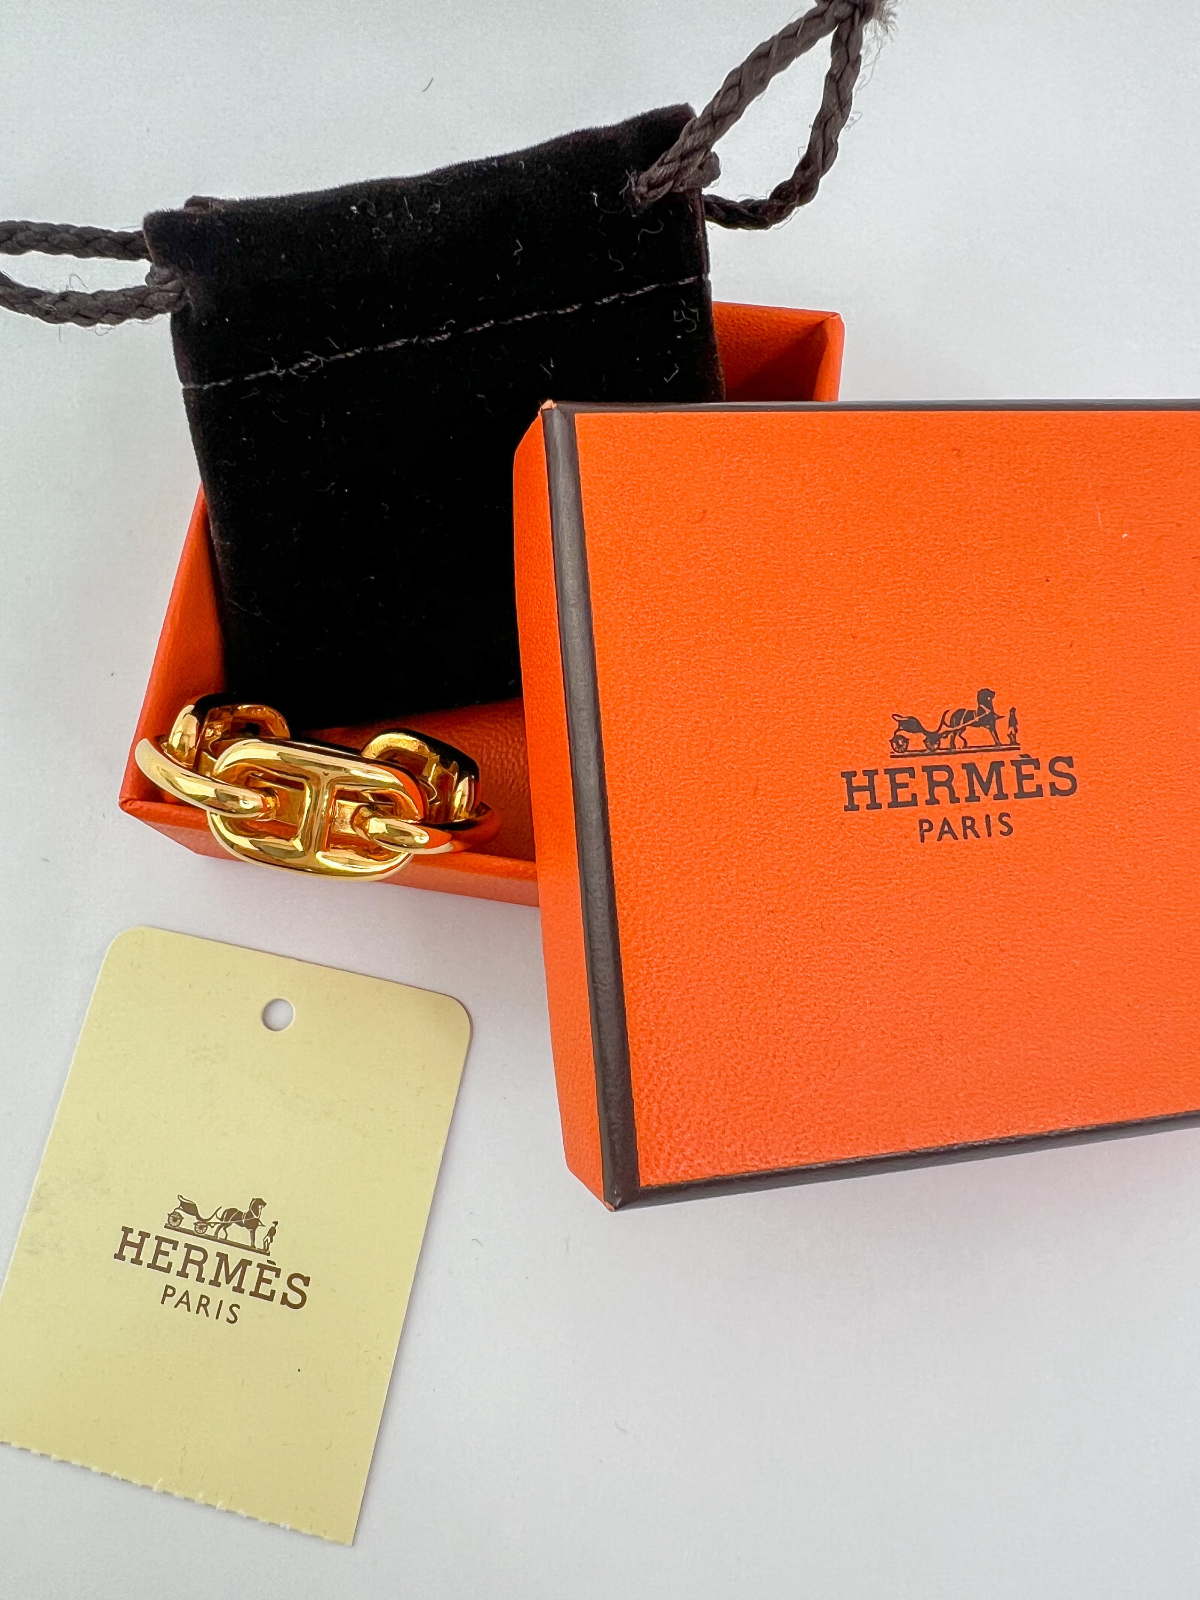 Vintage Hermes Scarf Ring, Vintage Gold Tone Scarf Ring, Chain Scarf Ring, Vintage Jewelry, Jewelry for Women, Gift for her, Gold Chain